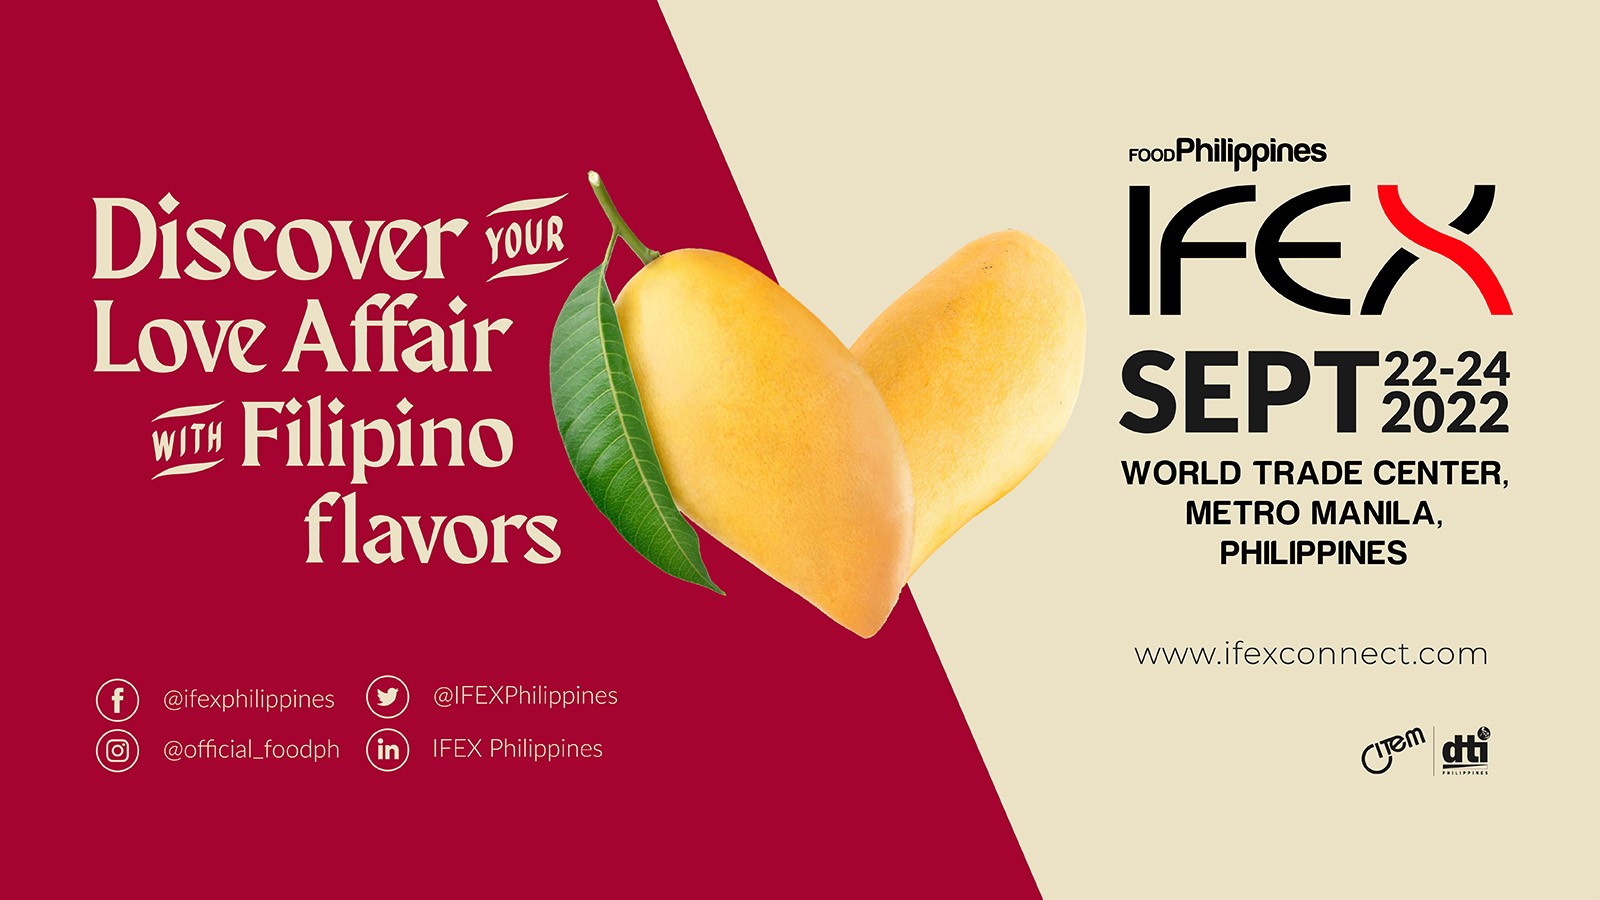 Food export show IFEX Philippines returns on site this September